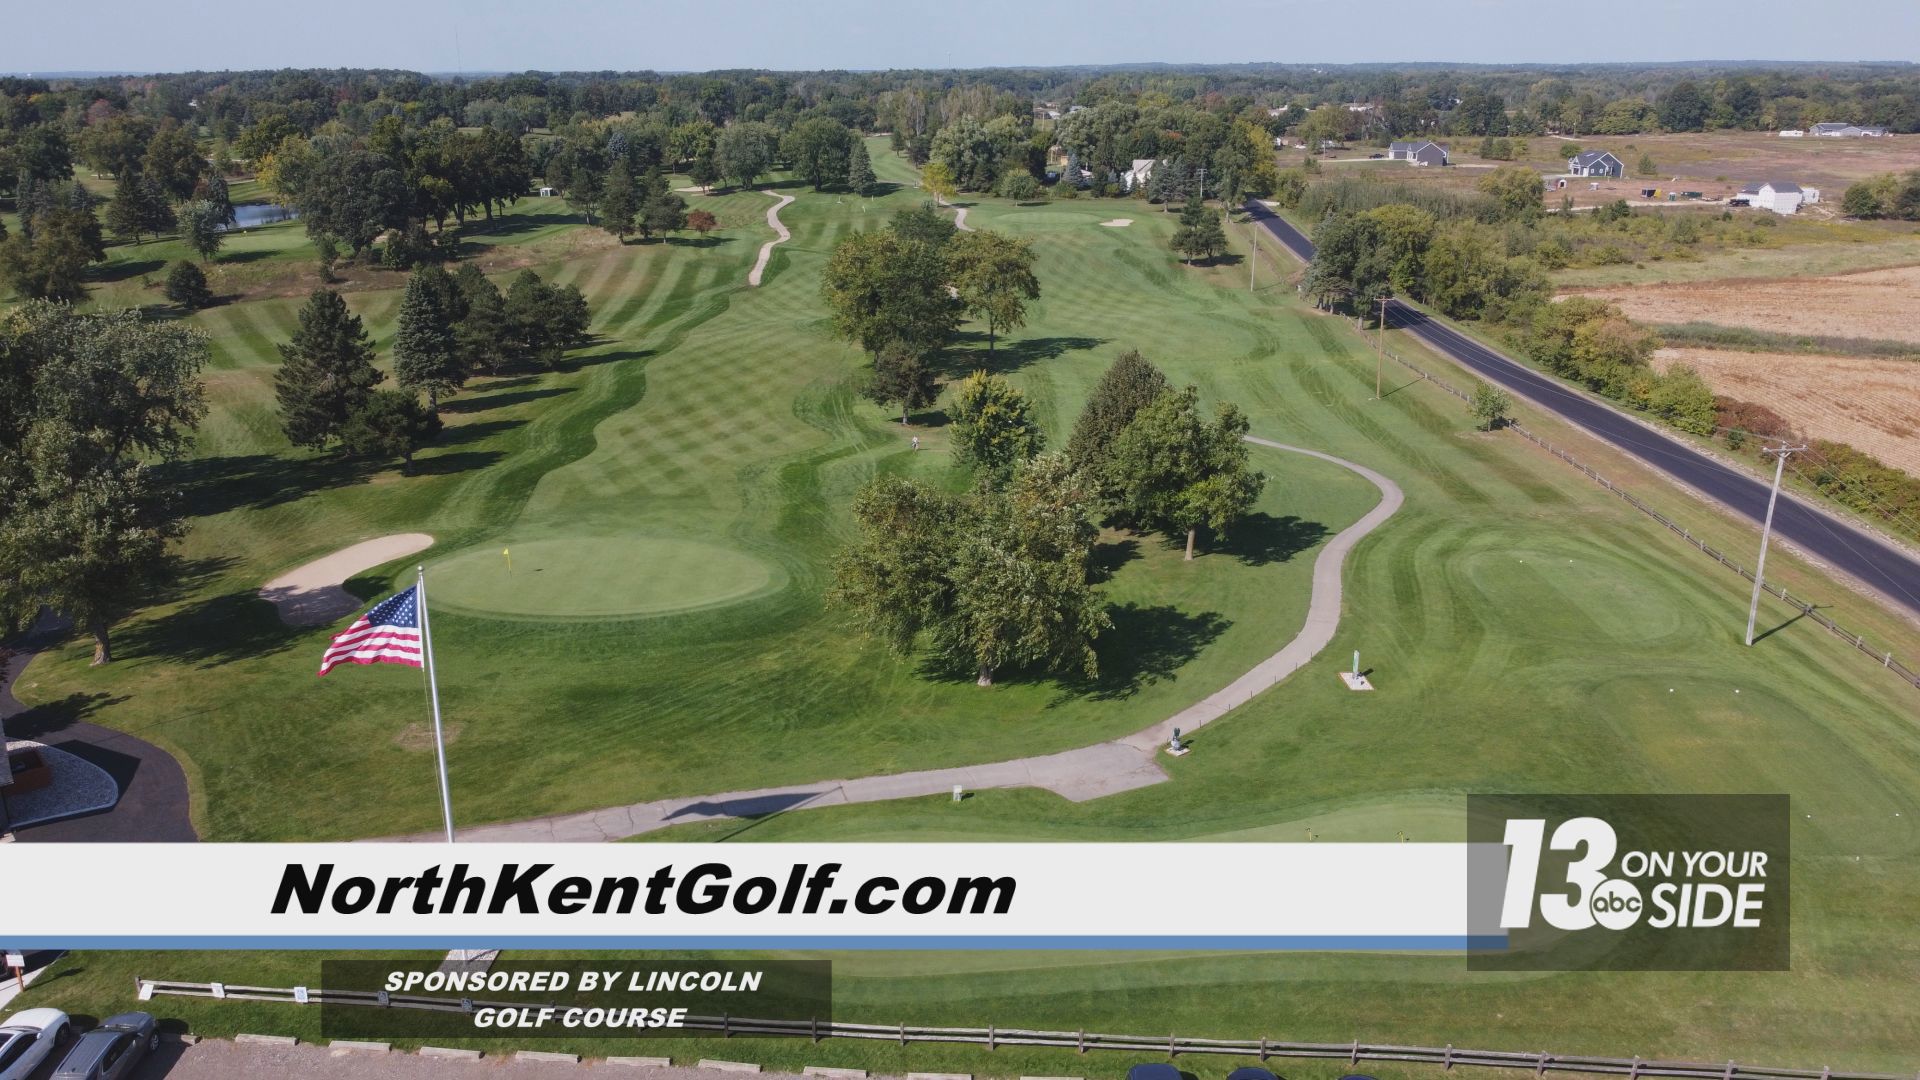 Whether you’re a seasoned pro or a newcomer to the game, North Kent Golf Course in Rockford provides an enjoyable, yet challenging experience.